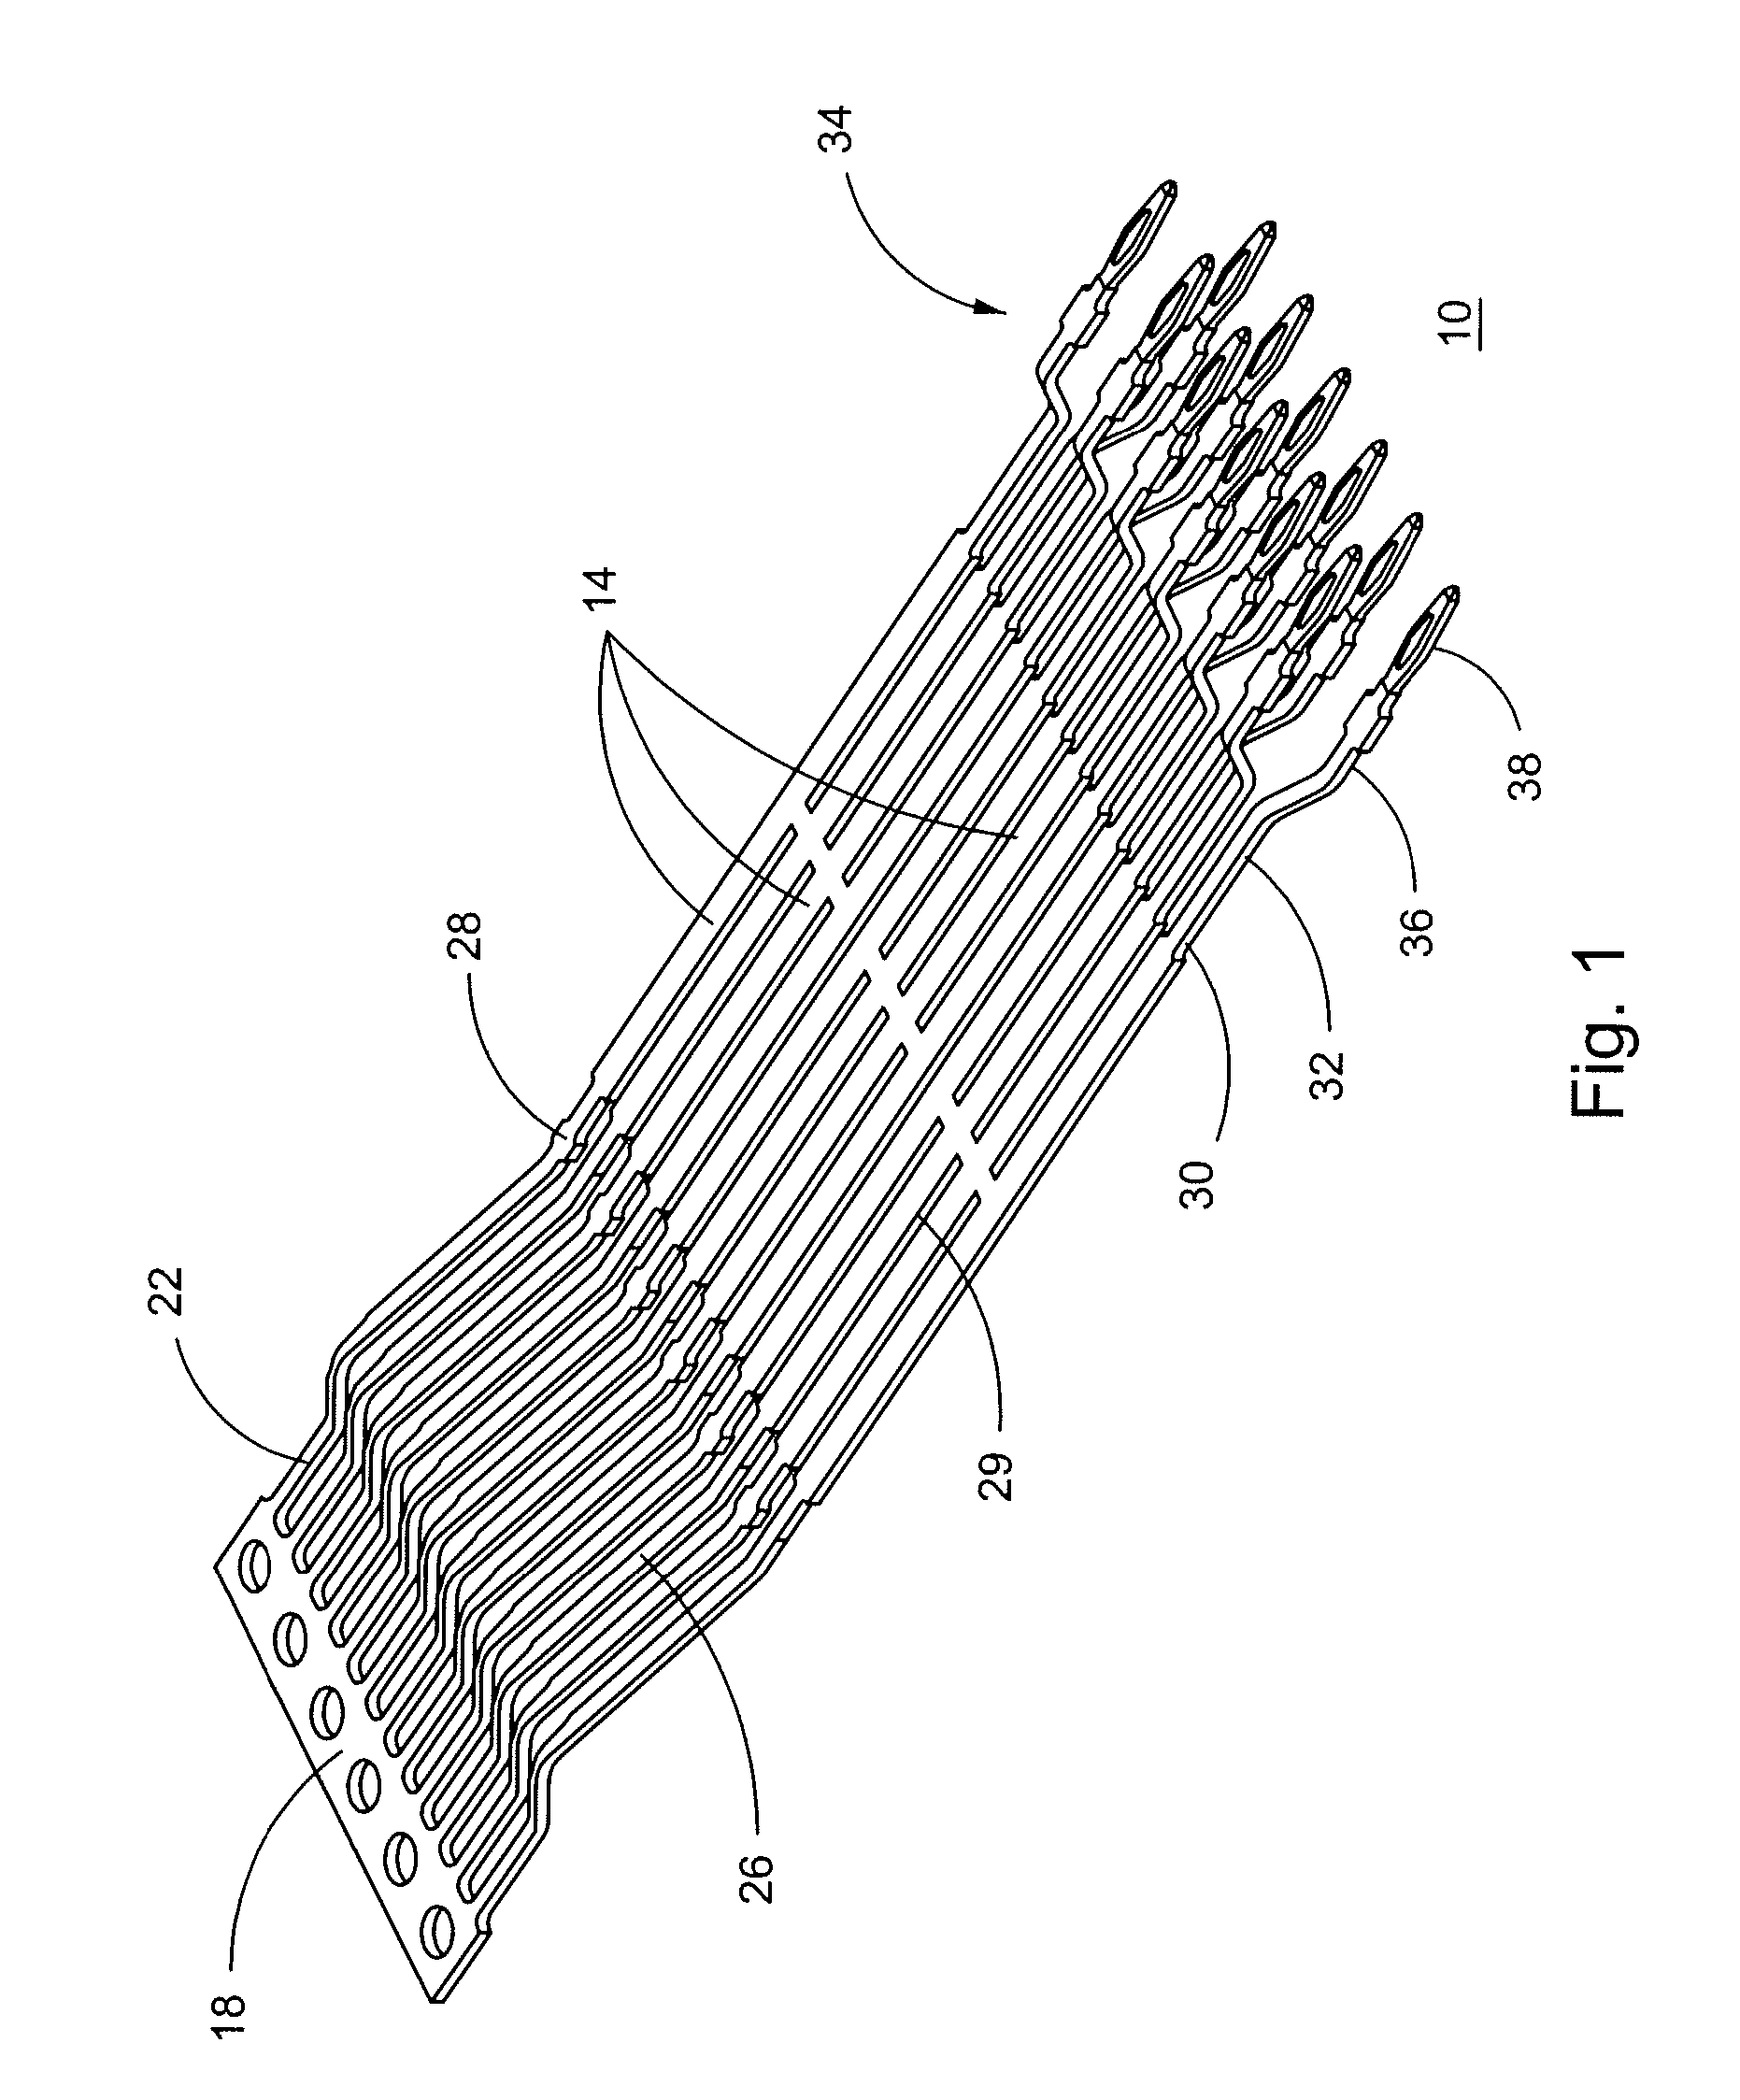 Overmolded Electrical Contact Array